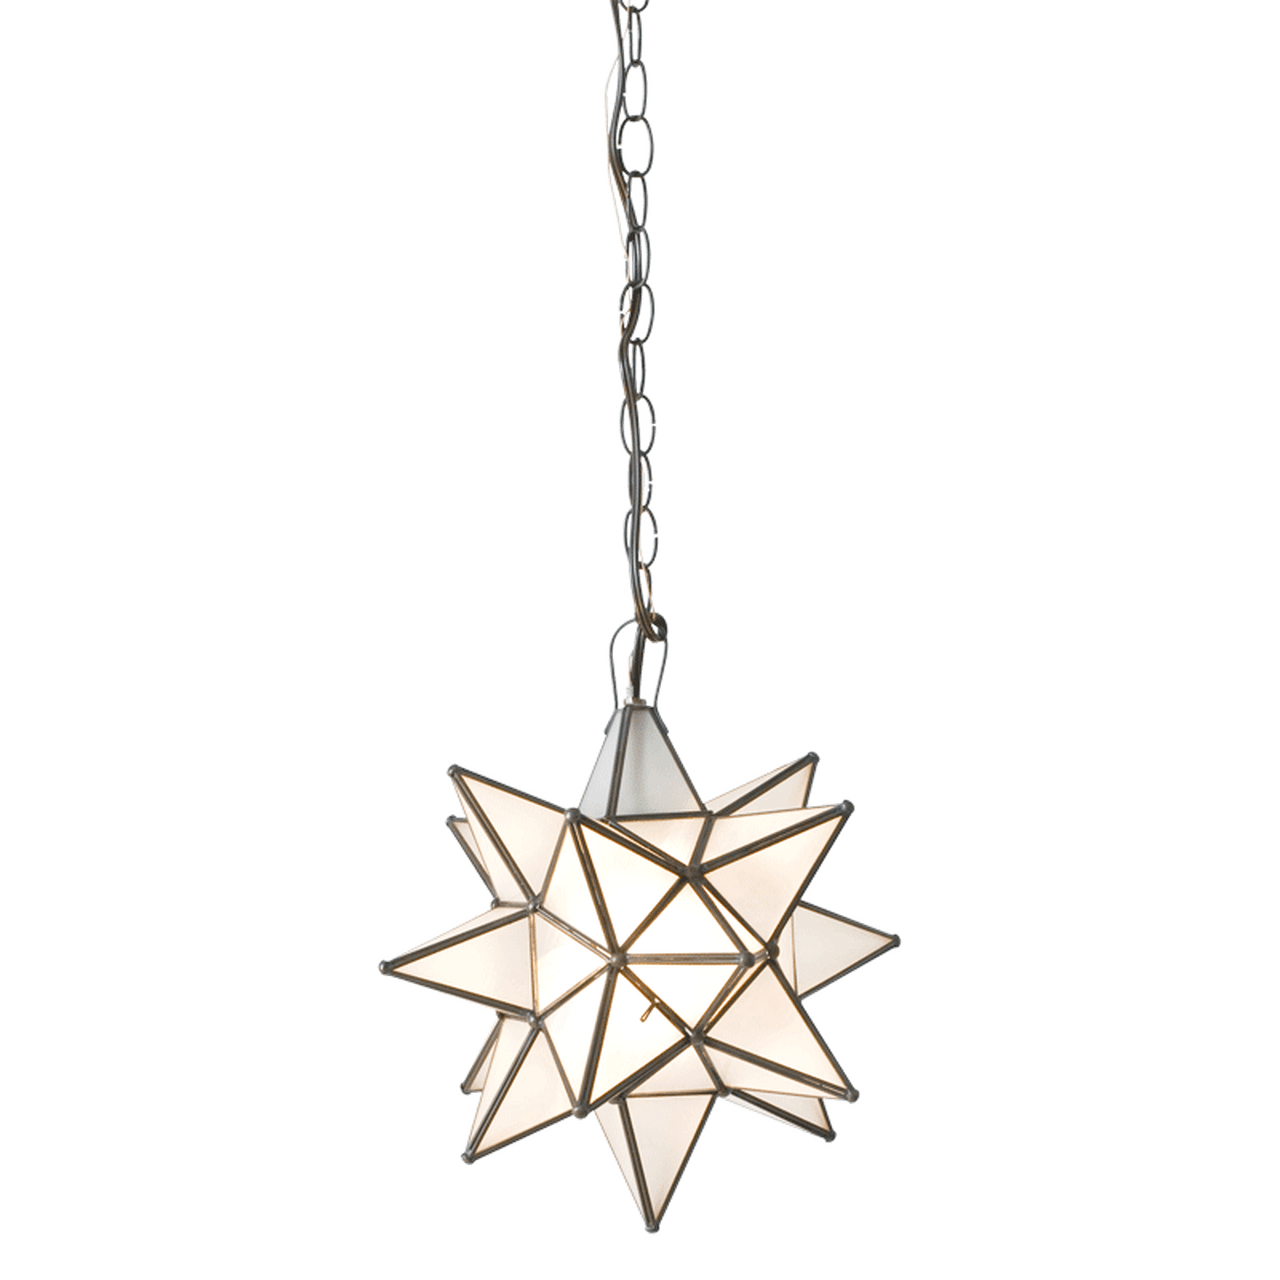 Worlds Away Worlds Away AGS812 Small Frosted Star Chandelier - Brass AGS812